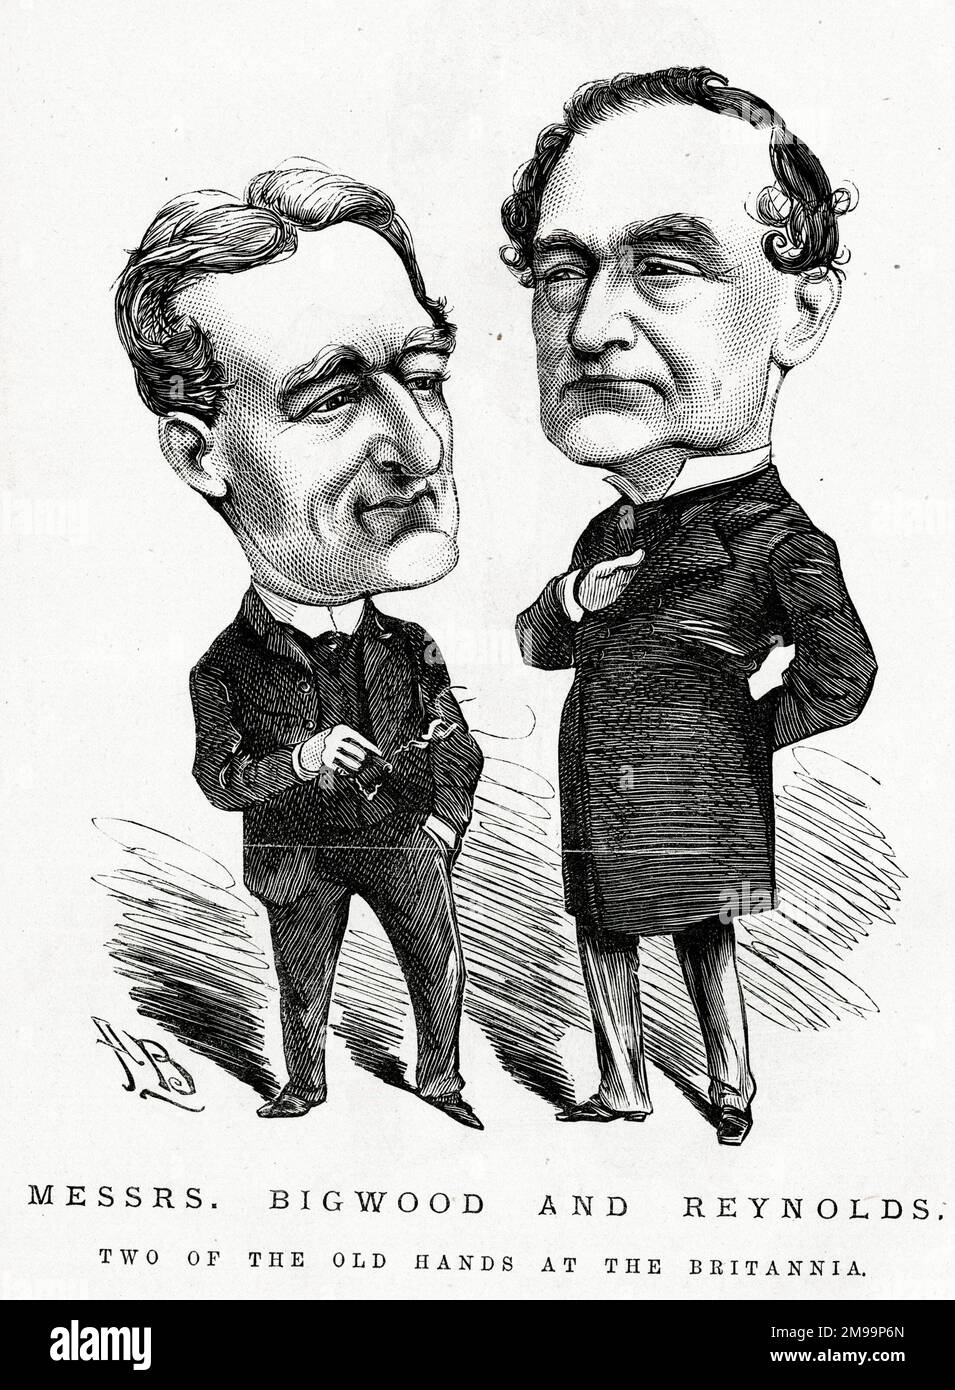 Cartoon, Messrs Bigwood and Reynolds, Two of the old hands at the Britannia (theatre in Hoxton, London). George Barnes Bigwood was the resident low comedian and occasional stage manager; Joseph Reynolds was an actor. Stock Photo